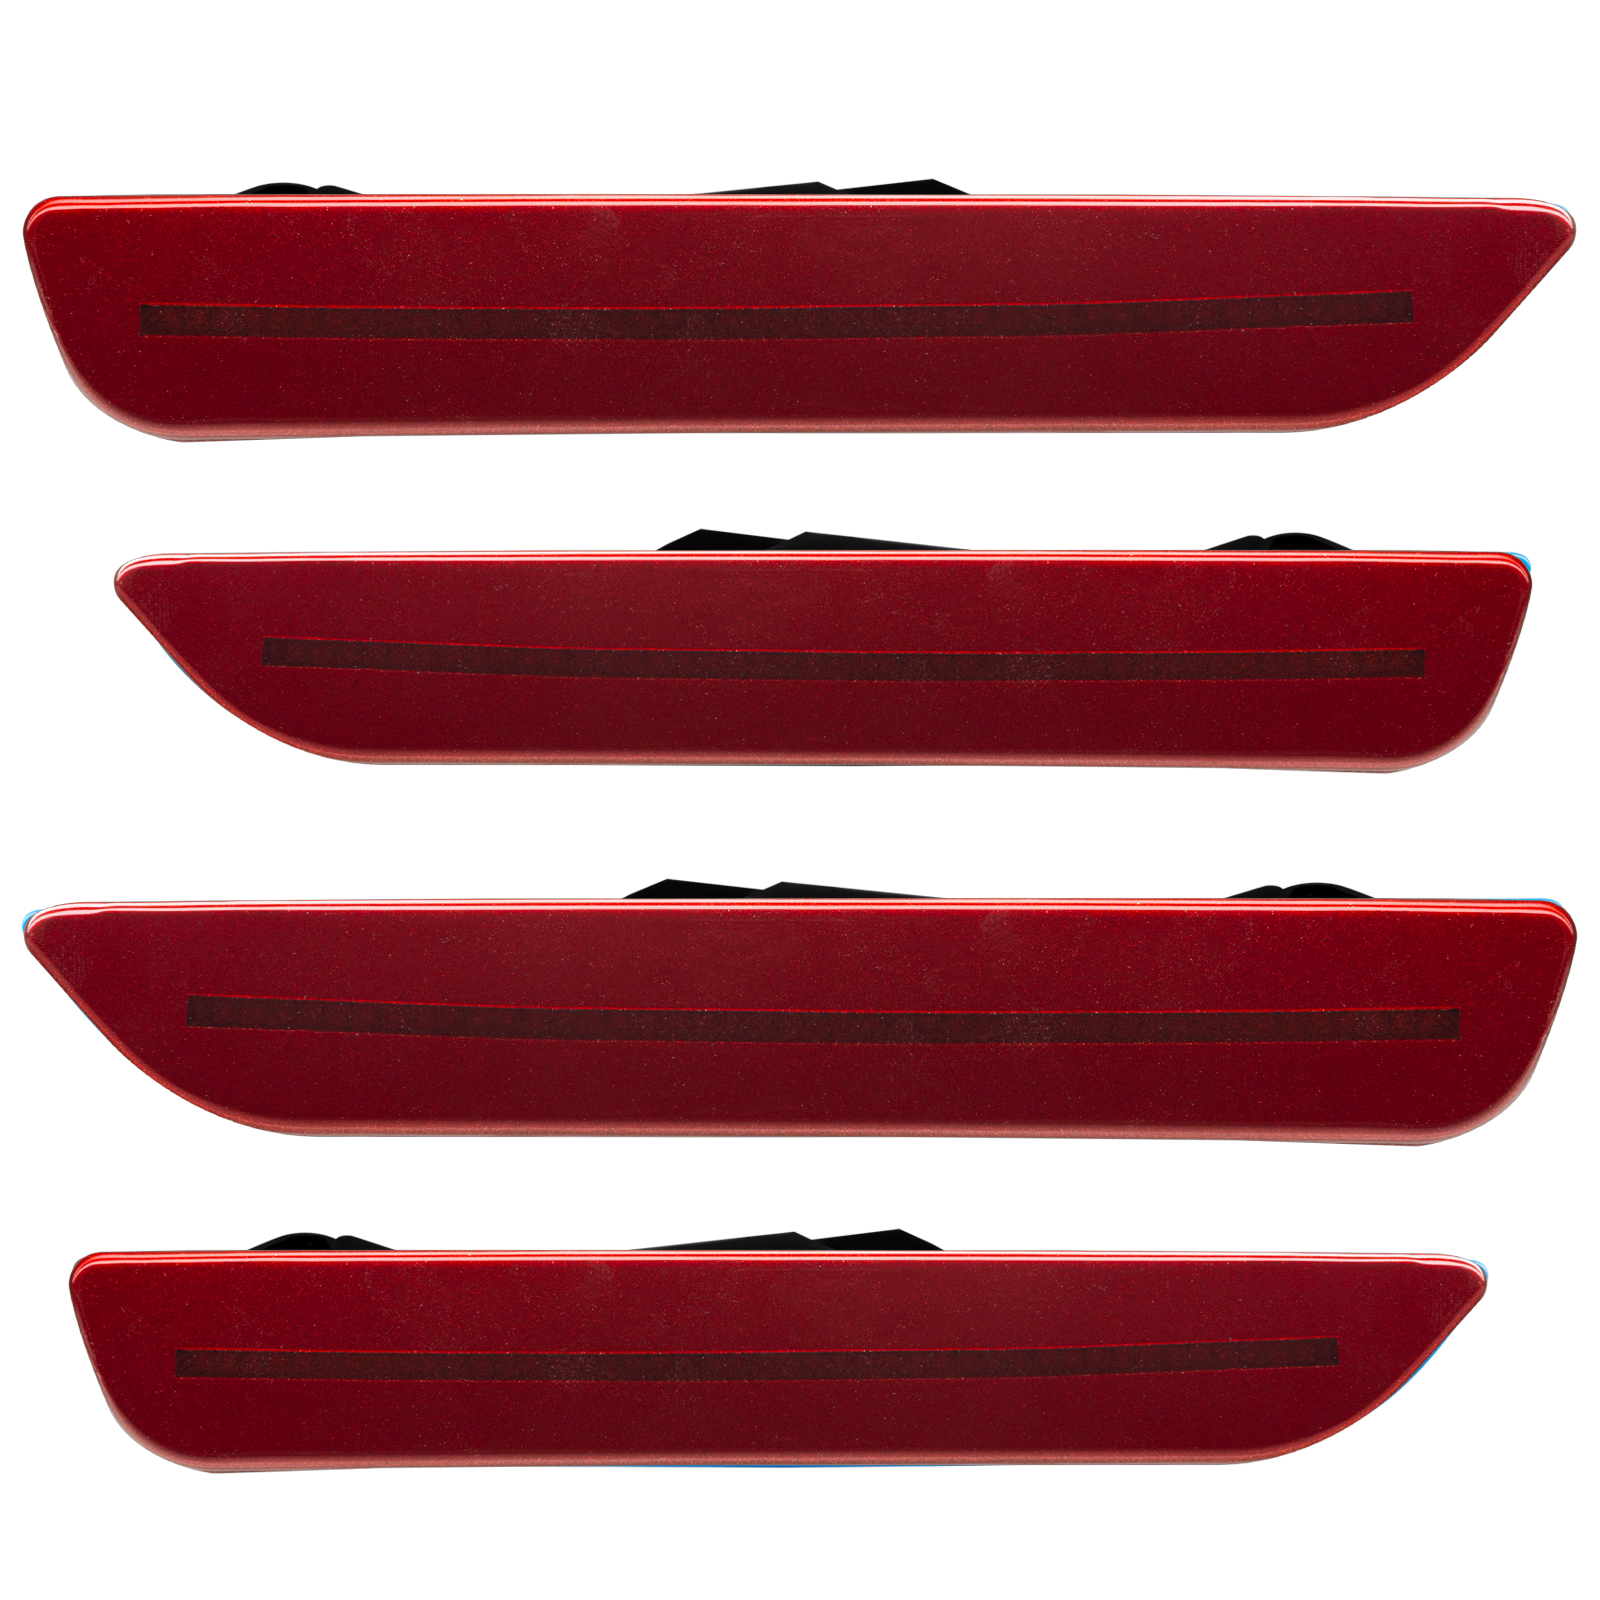 Picture of Oracle Lighting 9700-RR-G Concept Sidemarker Set, Ghosted, Ruby Red Metallic (rr)